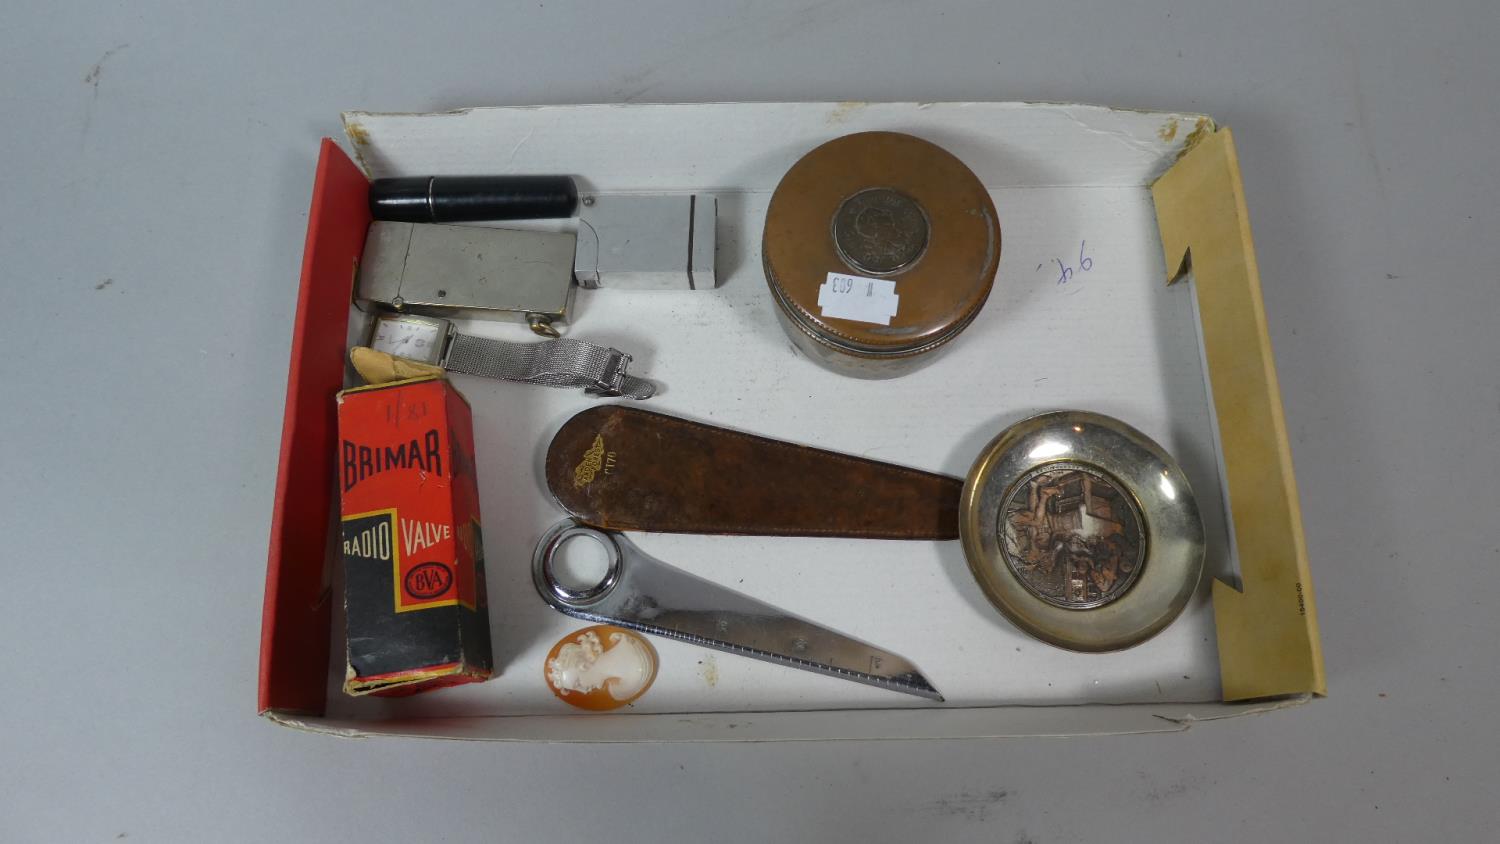 A Tray of Curios to Include Cigarette Lighters, Wrist Watch, Letter Opener/Ruler, Coin Lidded Dish